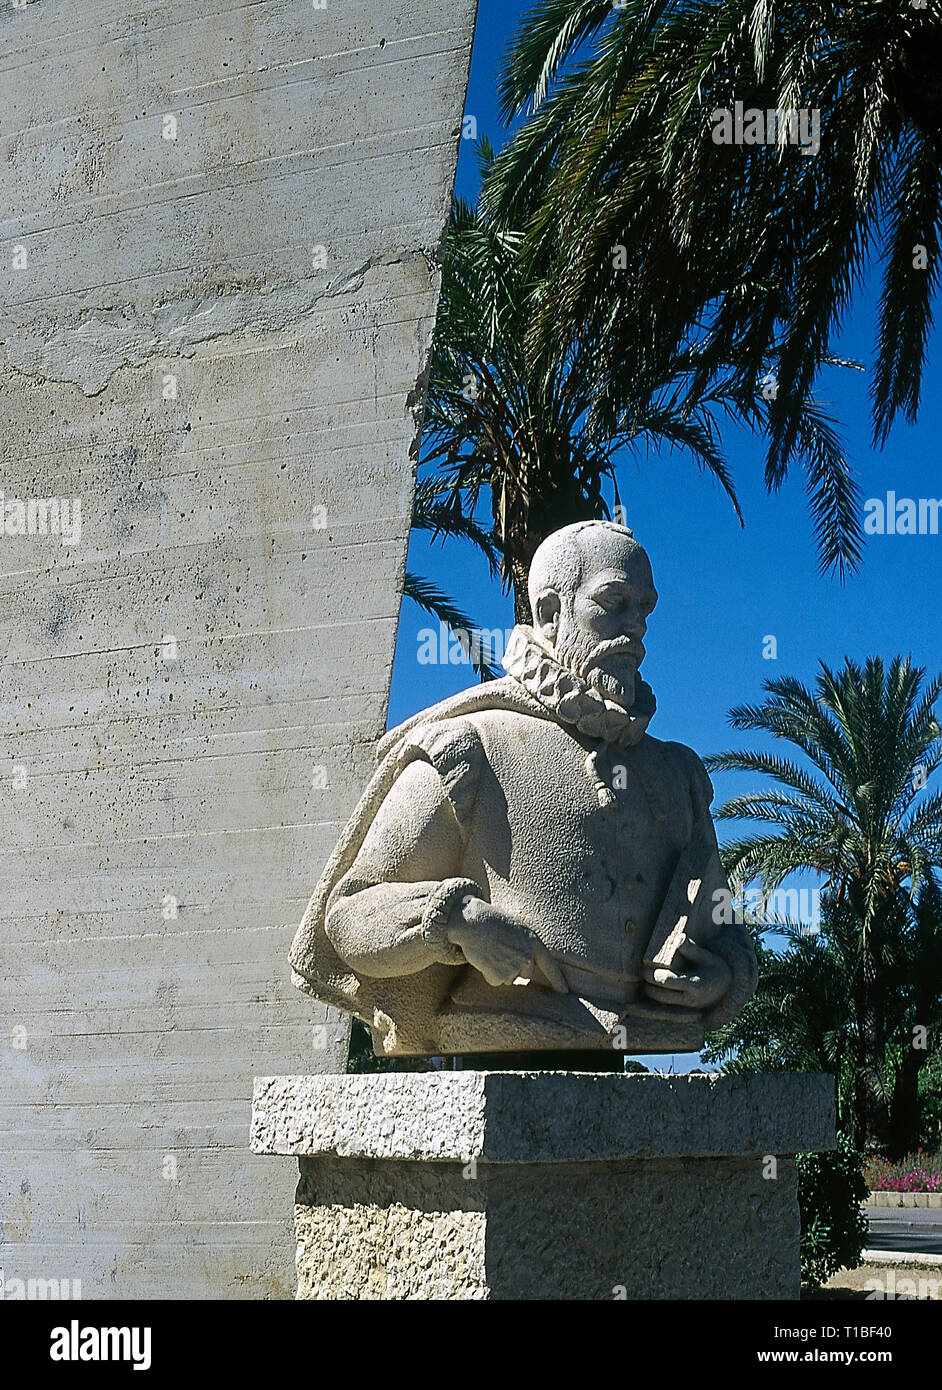 Miguel de Cervantes (1547-1616). Spanish writer. Author of Don Quixote. Monument to Cervantes in tribute for his landing in Denia after his captivity in Algiers, 1580. Denia, province of Alicante, Community of Valencia, Spain. Stock Photo